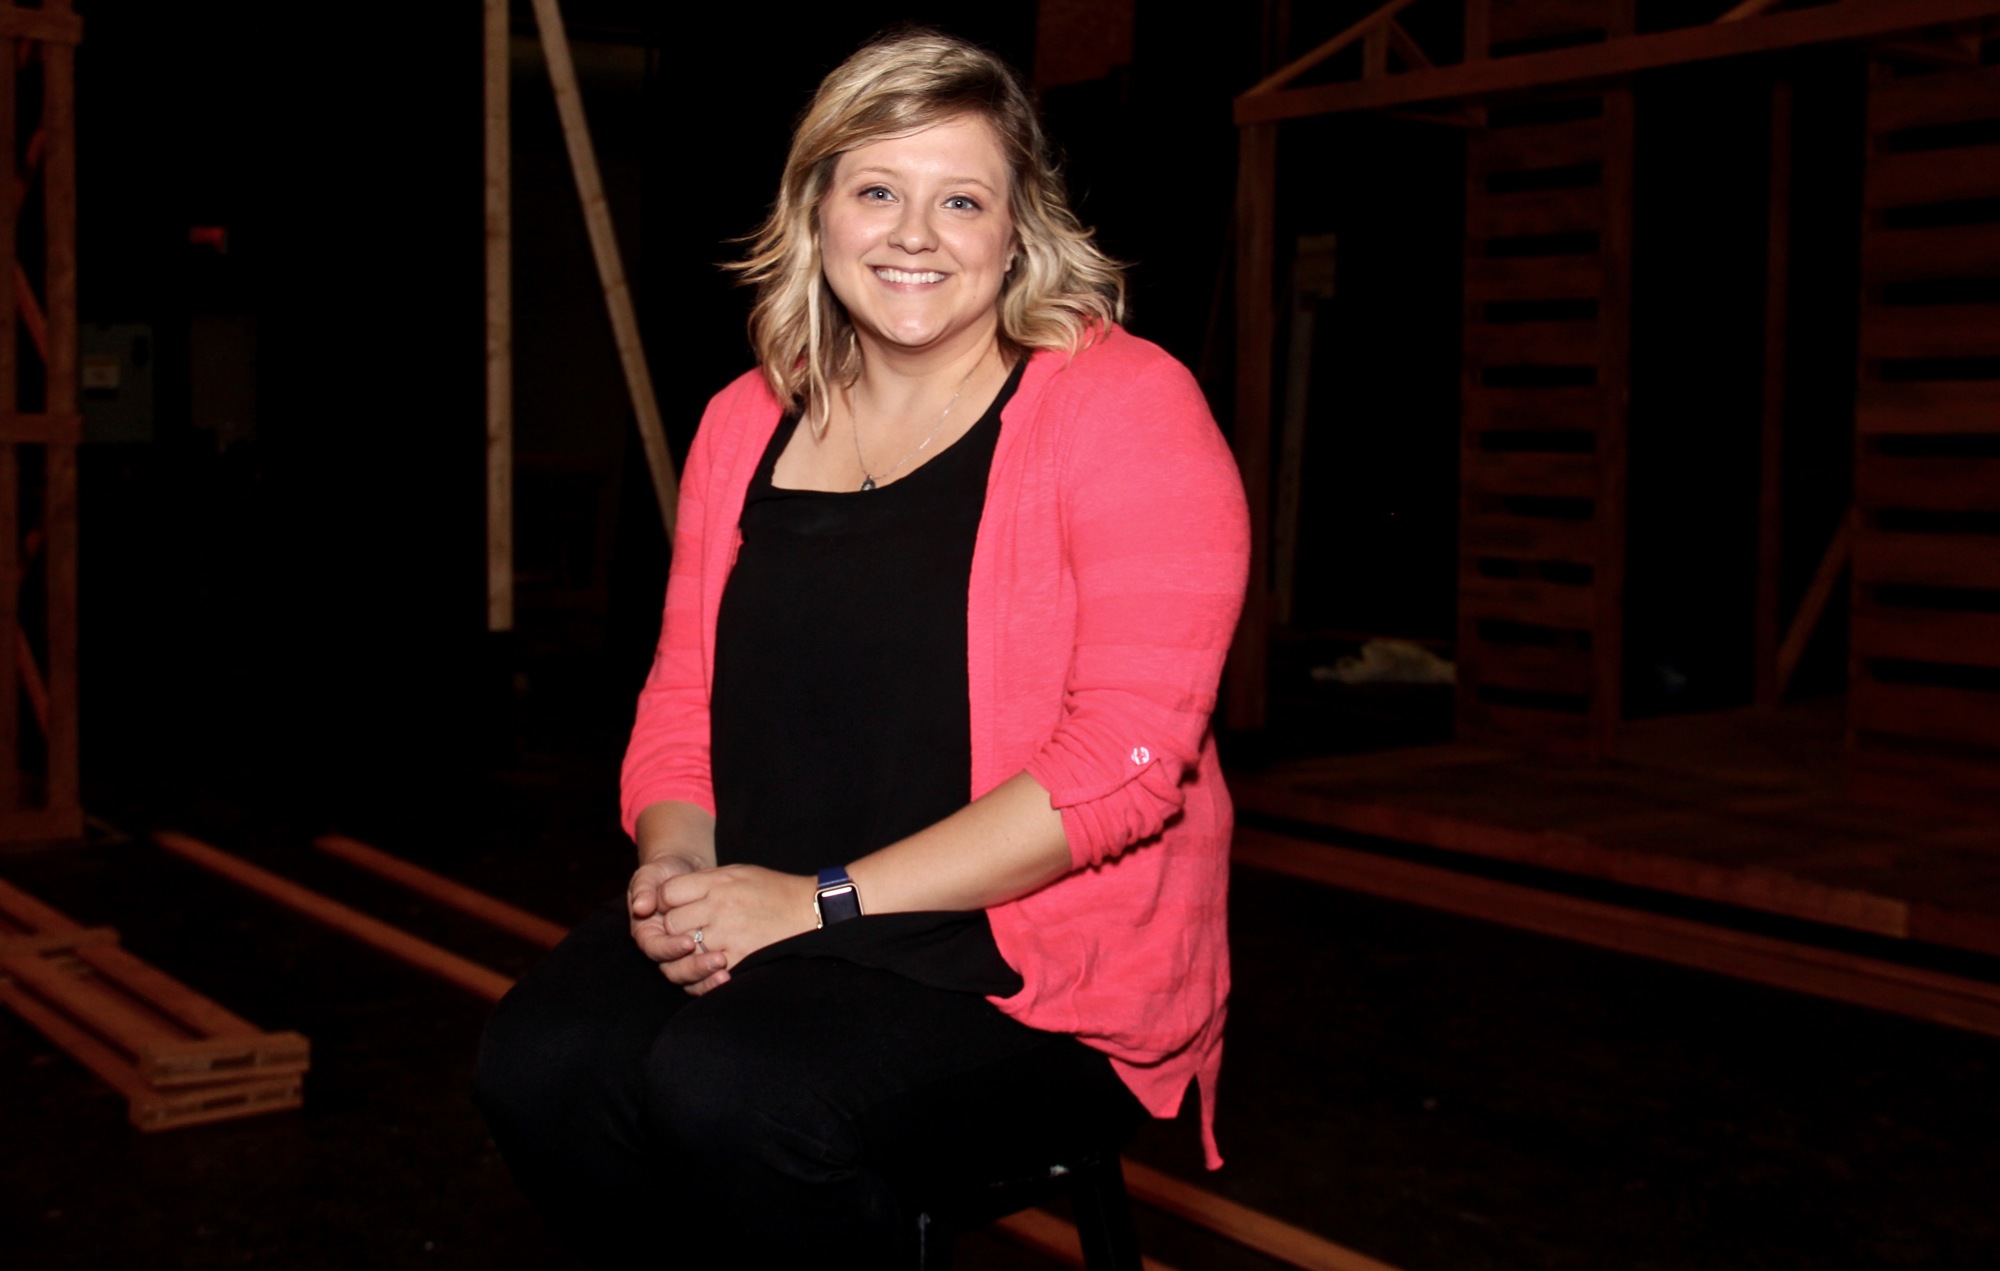 As the high school’s new theater director, Tara Whitman has orchestrated the high school premier of “Bright Star” at West Orange.